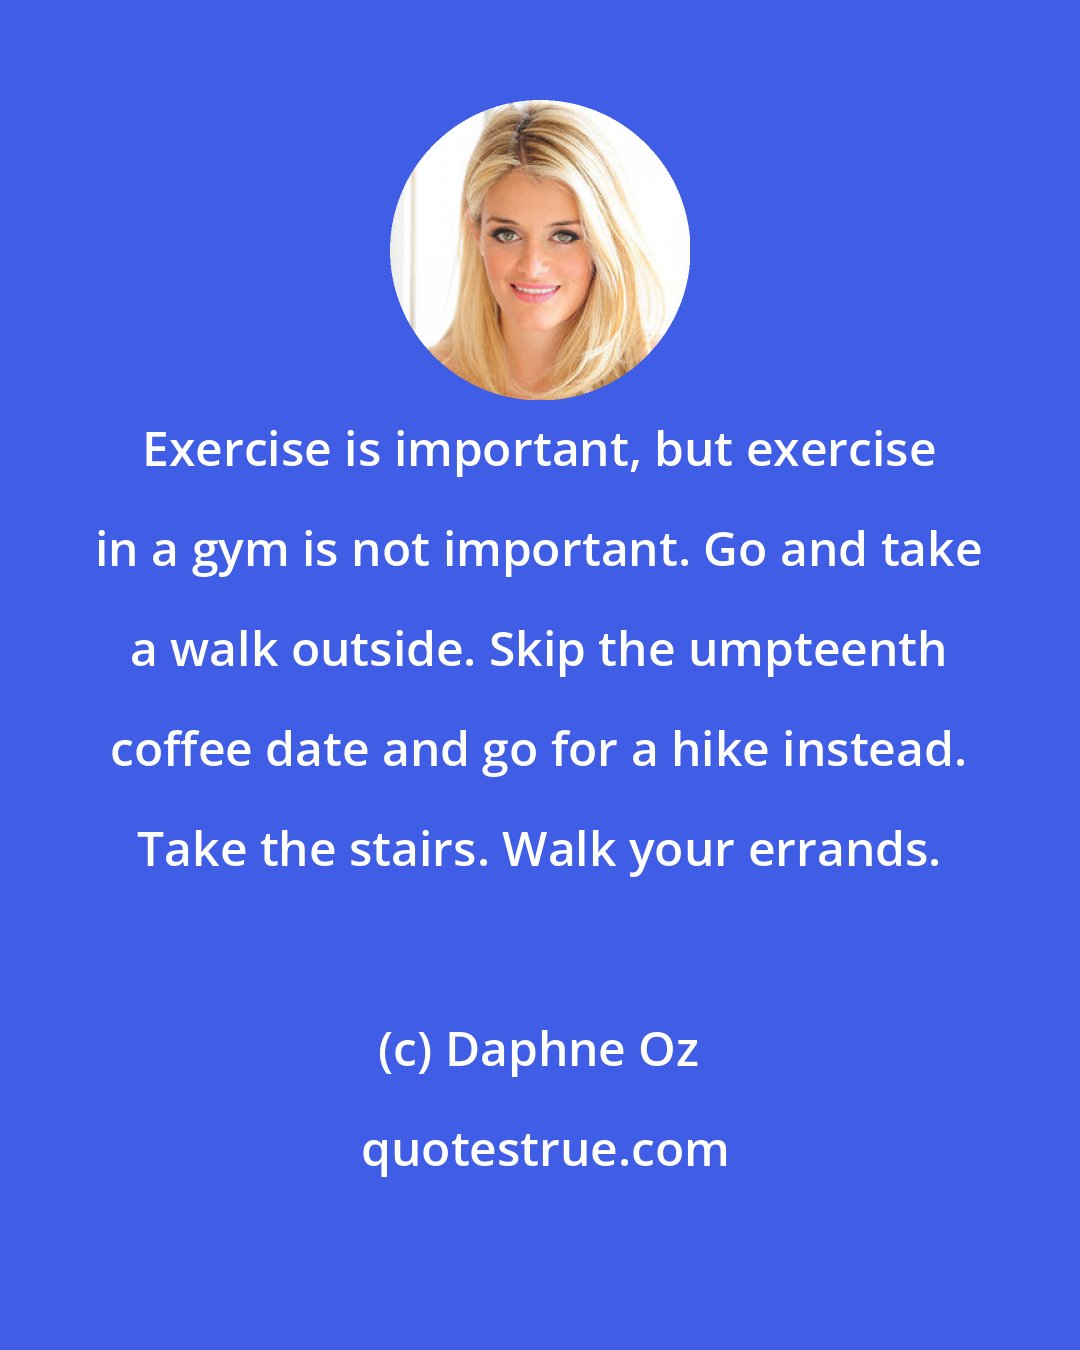 Daphne Oz: Exercise is important, but exercise in a gym is not important. Go and take a walk outside. Skip the umpteenth coffee date and go for a hike instead. Take the stairs. Walk your errands.